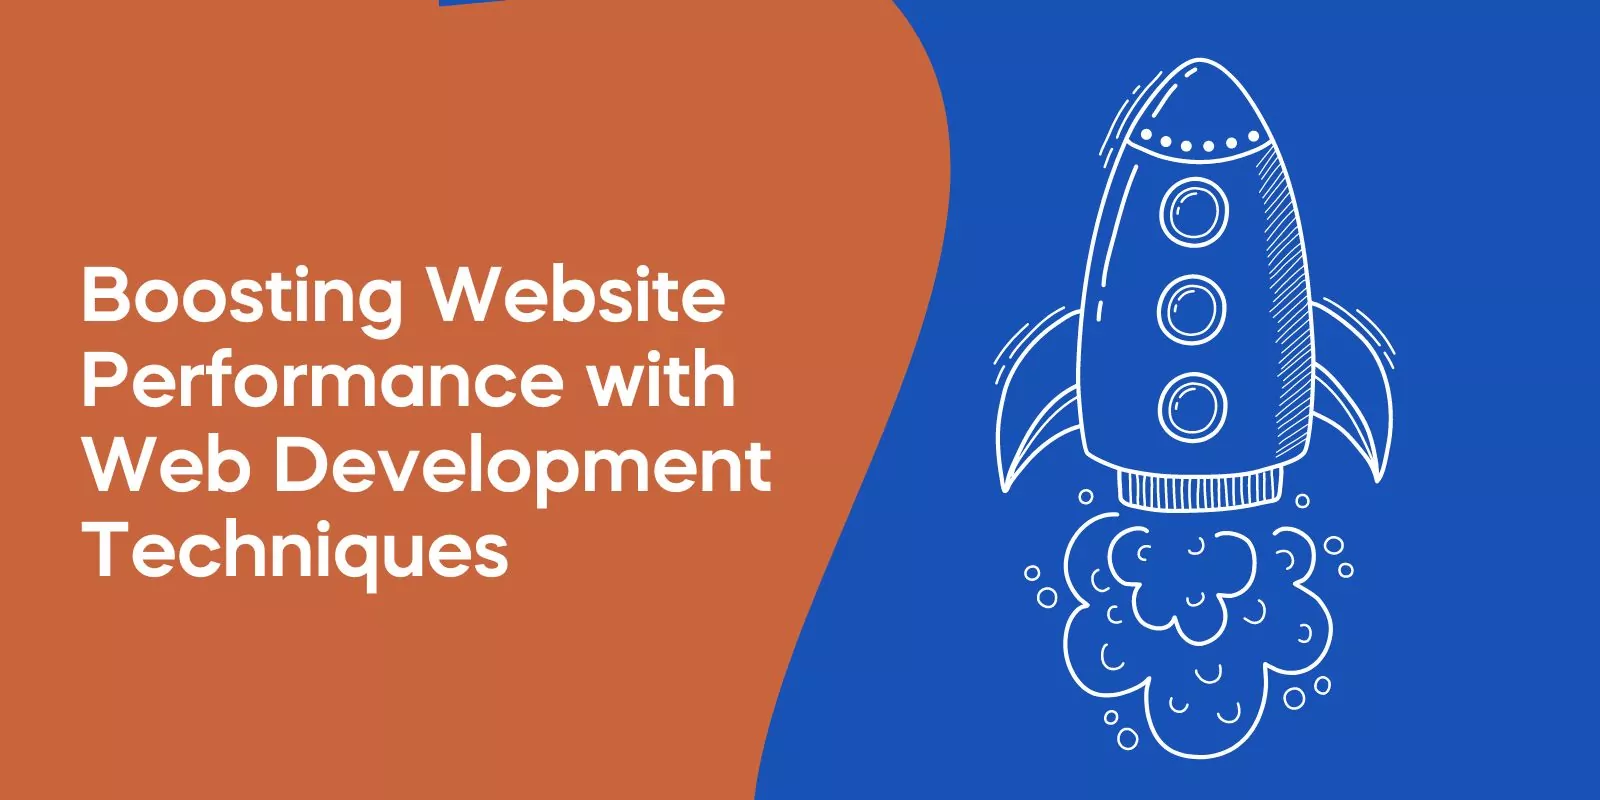 Boosting Website Performance with Web Development Techniques